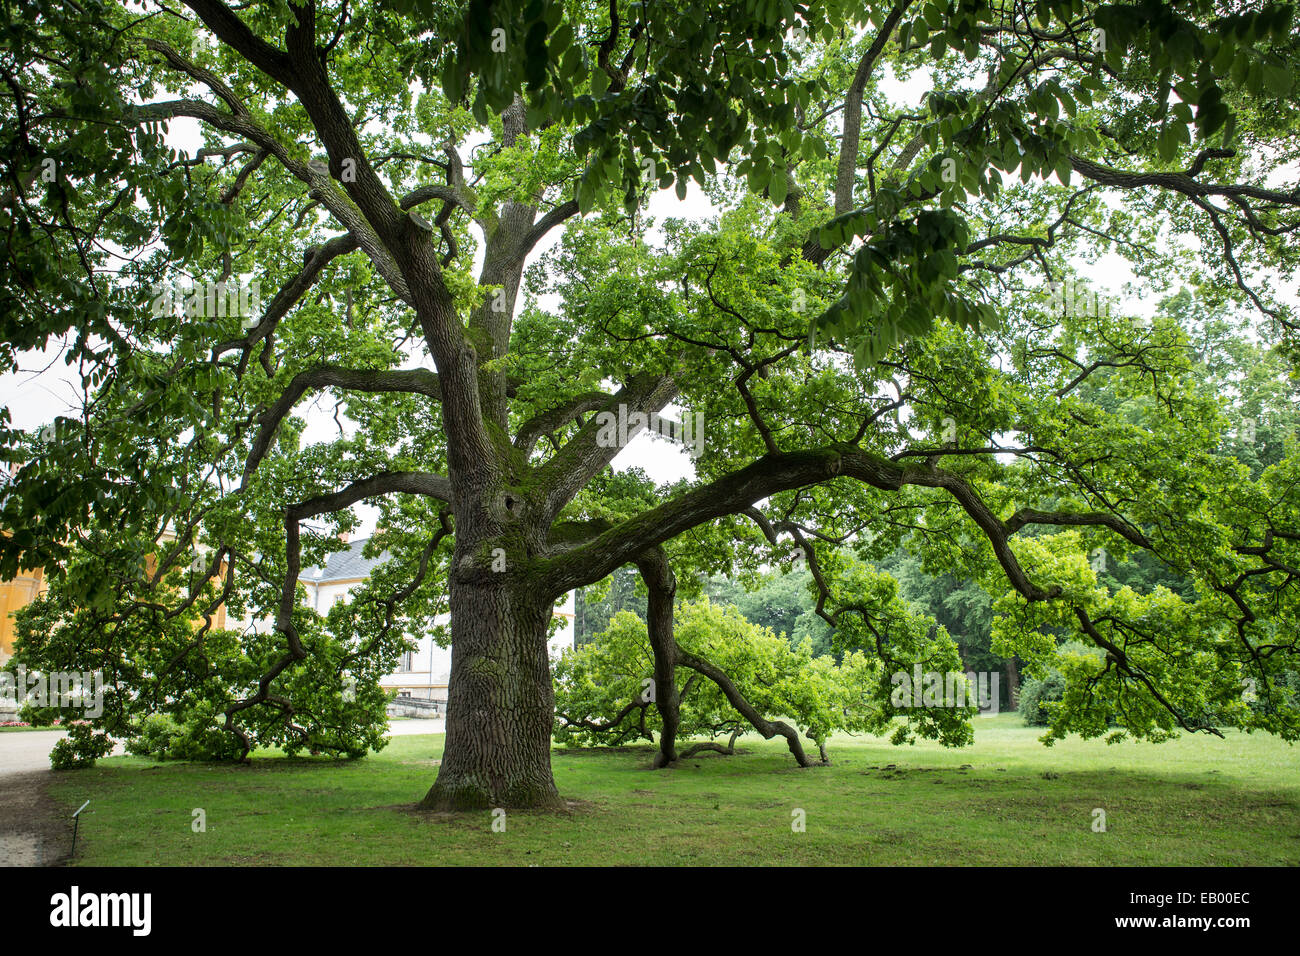 Giant Oak tree in summer with leaves in a park Stock Photo